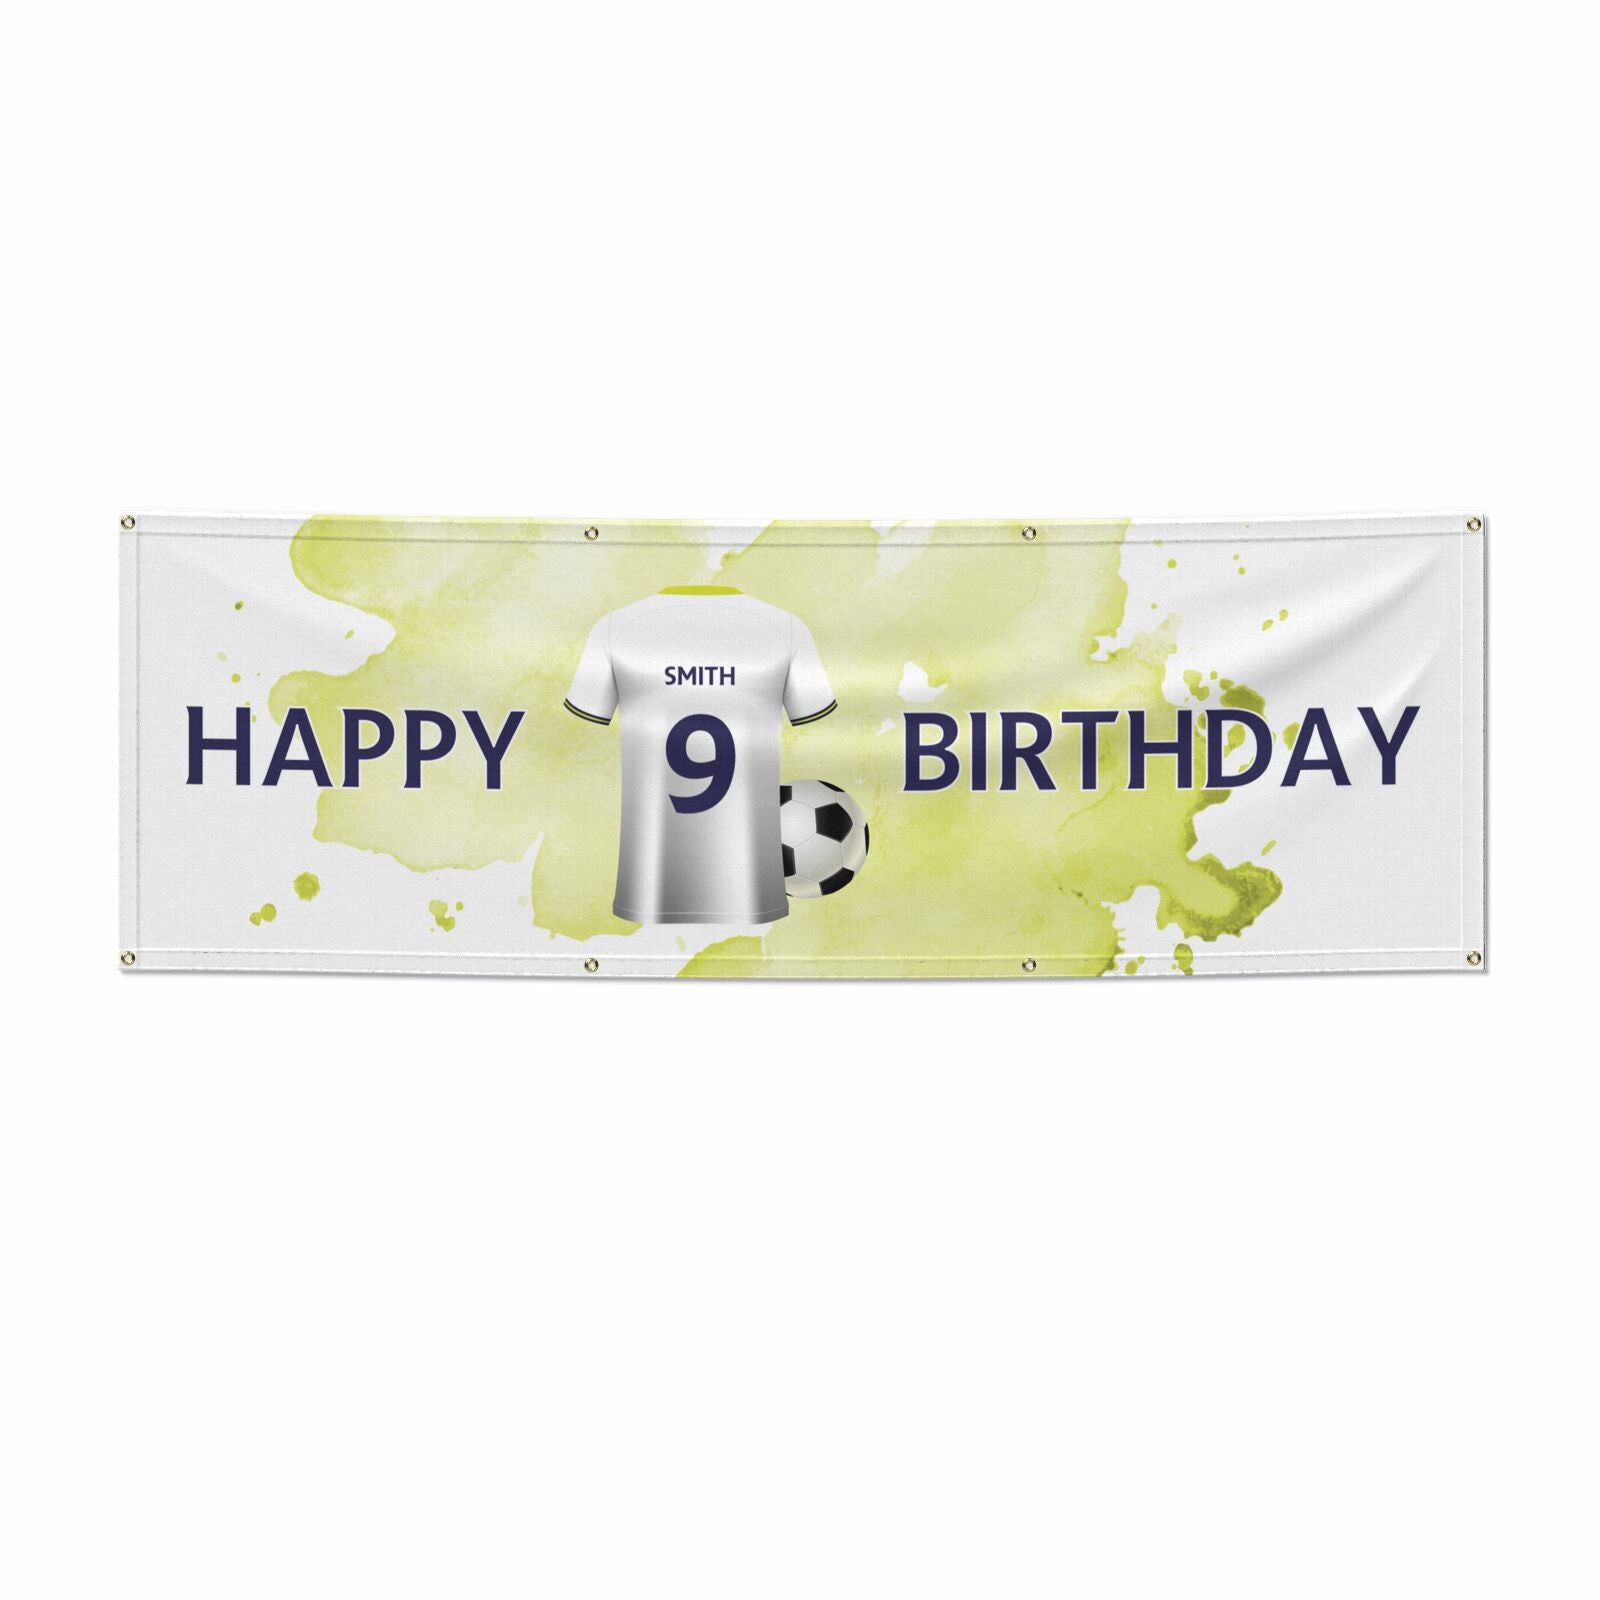 White Football Shirt Personalised 6x2 Vinly Banner with Grommets